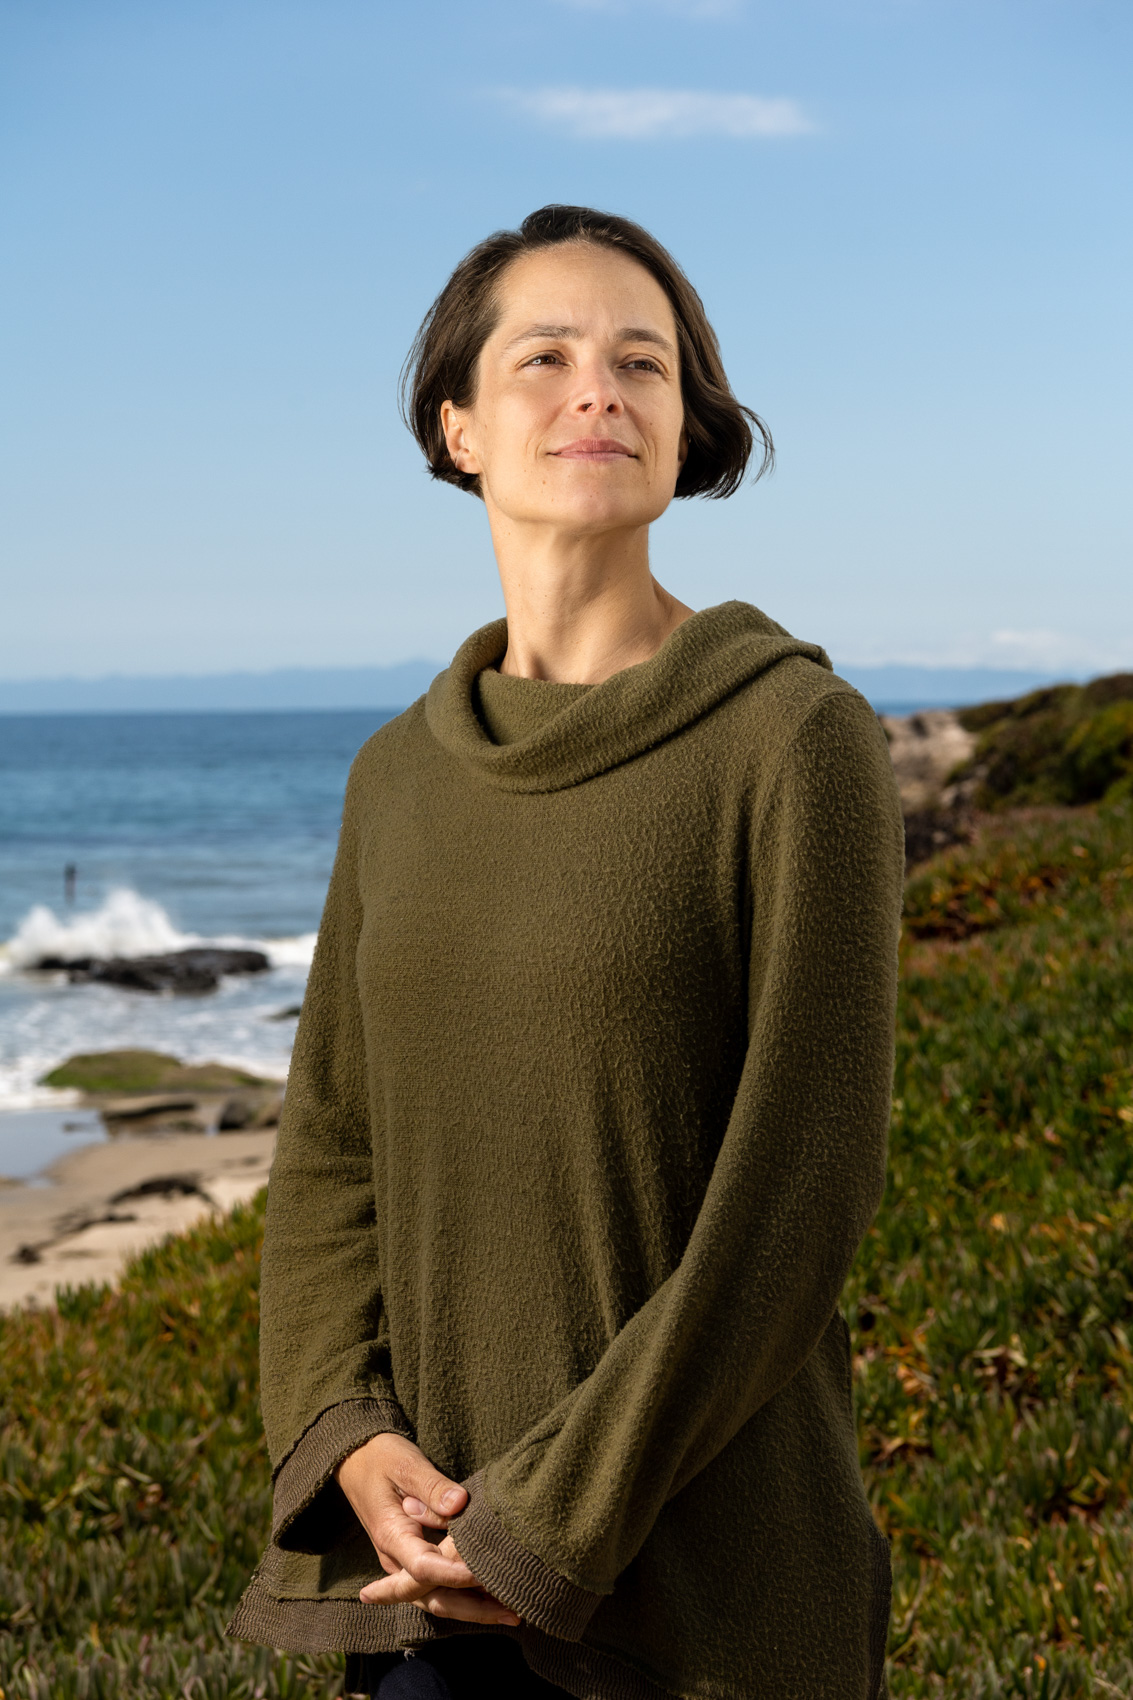 Portrait of female professor at UCSB for Dartmouth College advertisement at Campus Point Beach in Santa Barbara.